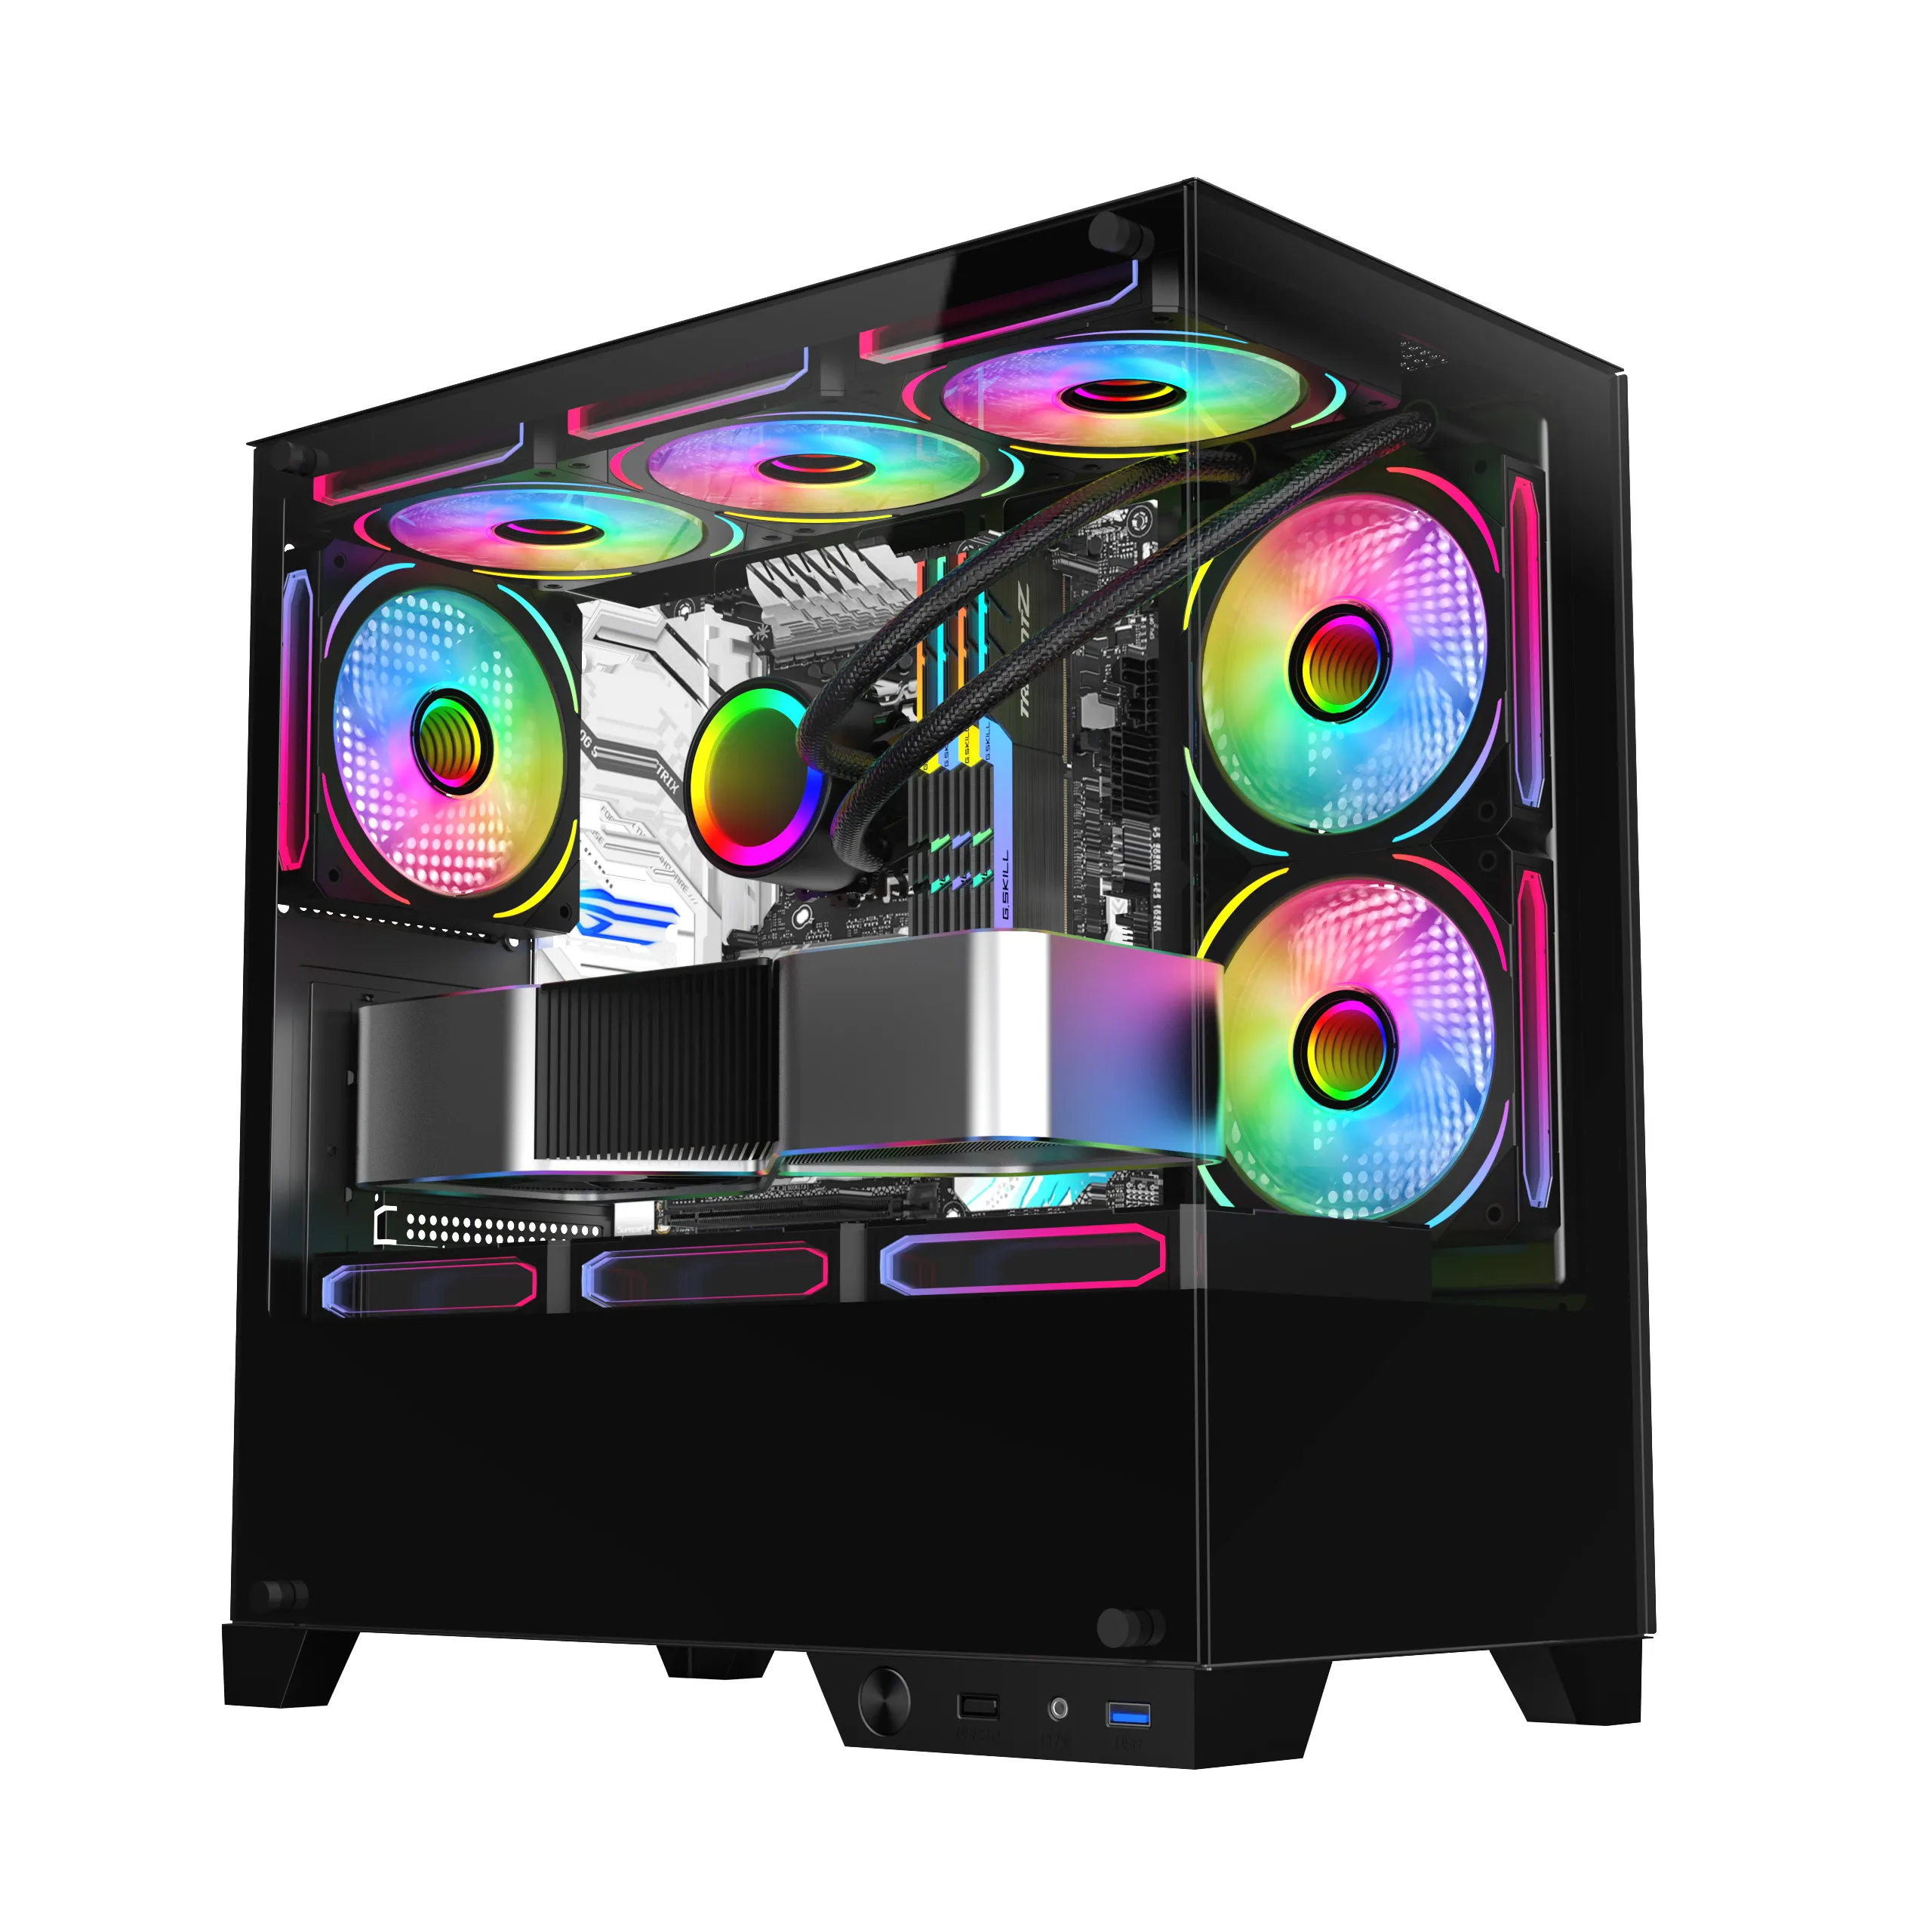 Popular Design Gaming Case Glass Panel Window RGB Fan Aluminum Gaming Computer Case Middle Tower ITX ATX PC Case for Gaming User